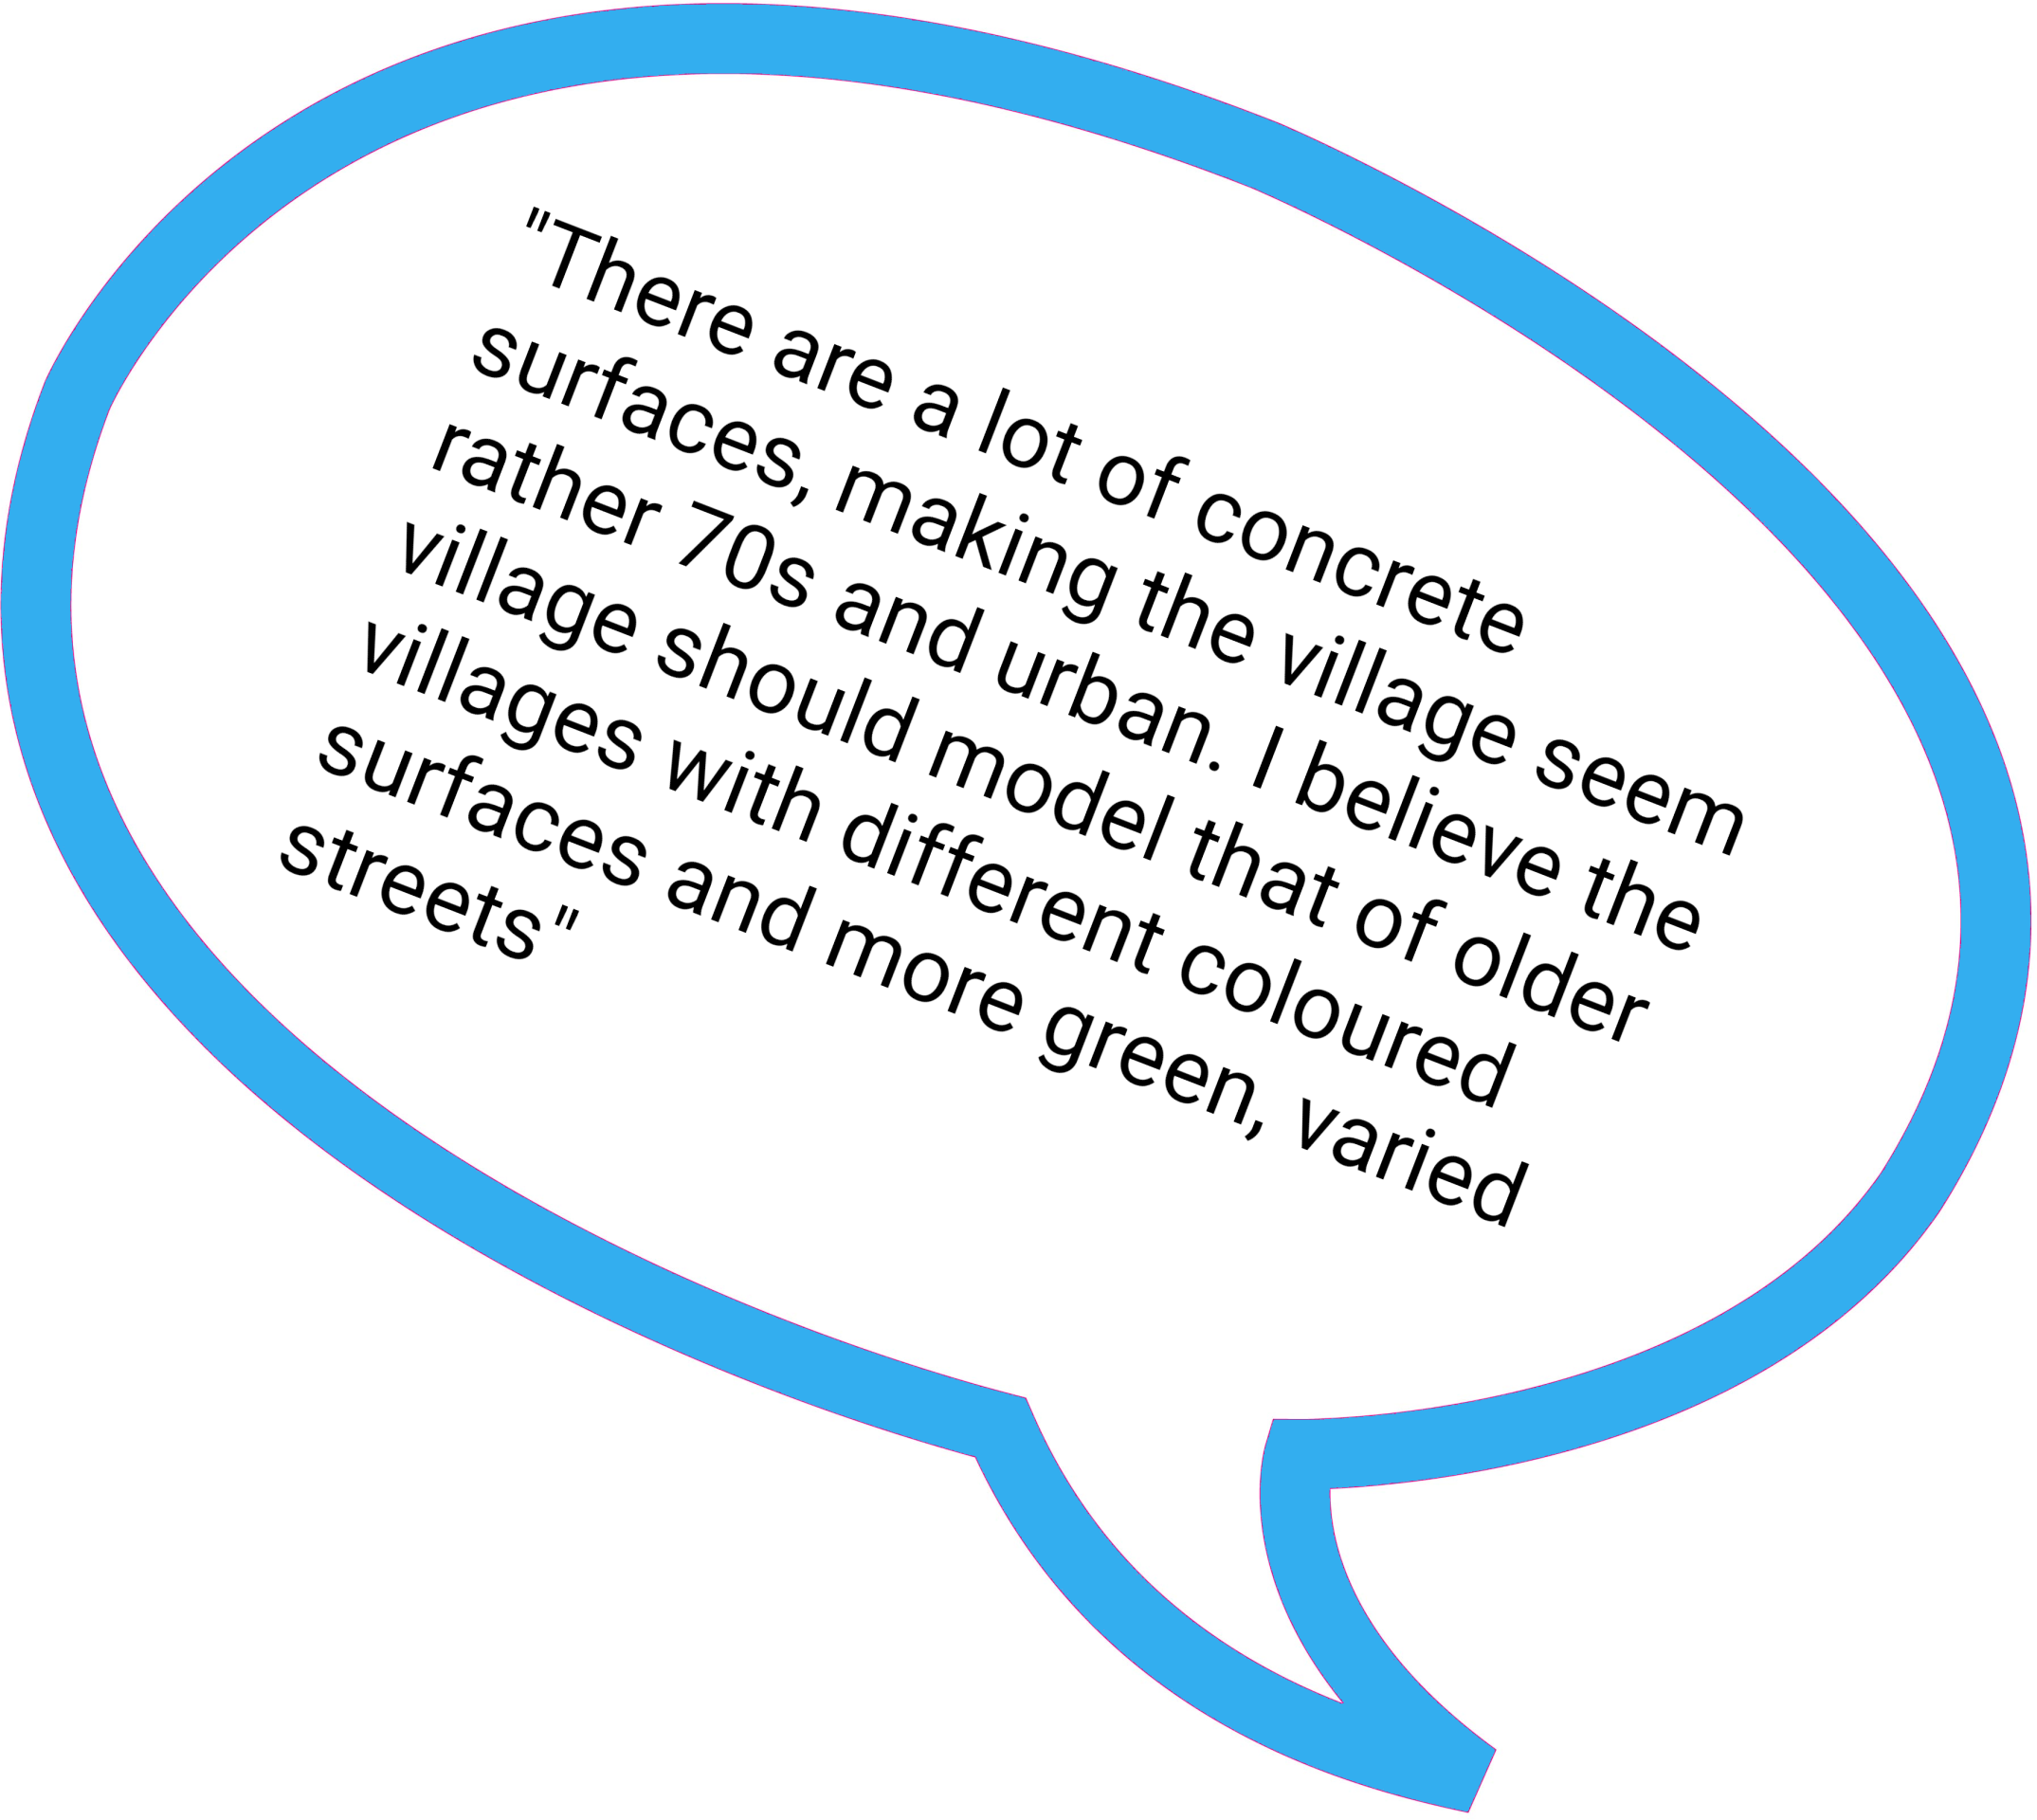 Speech bubble with caption: There are a lot of concrete surfaces, making the village seem rather 70s and urban. I believe the village should model that of older villages with different coloured surfaces and more green, varied streets